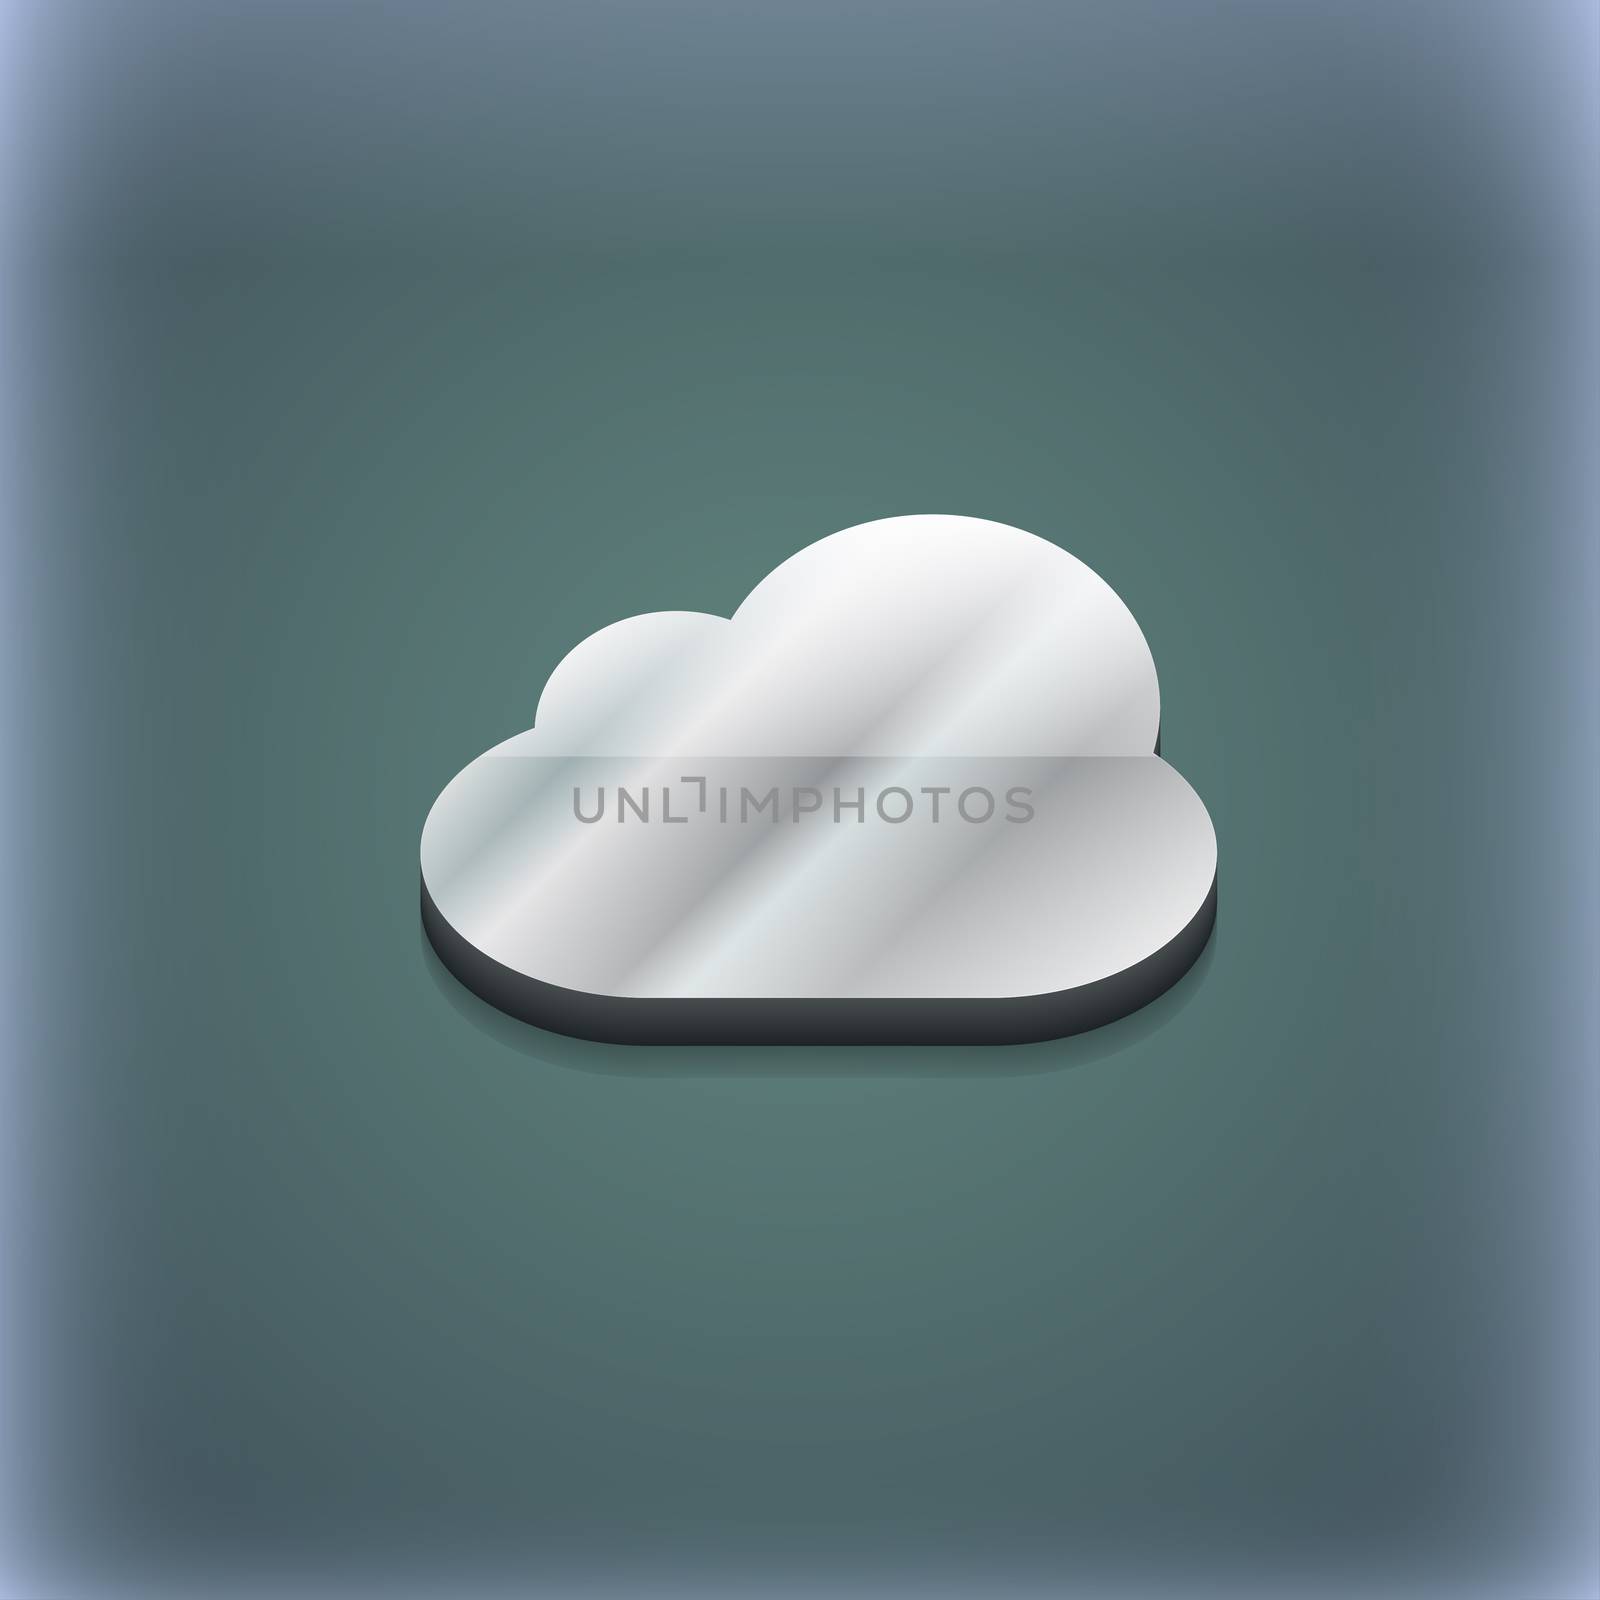 Cloud icon symbol. 3D style. Trendy, modern design with space for your text illustration. Raster version